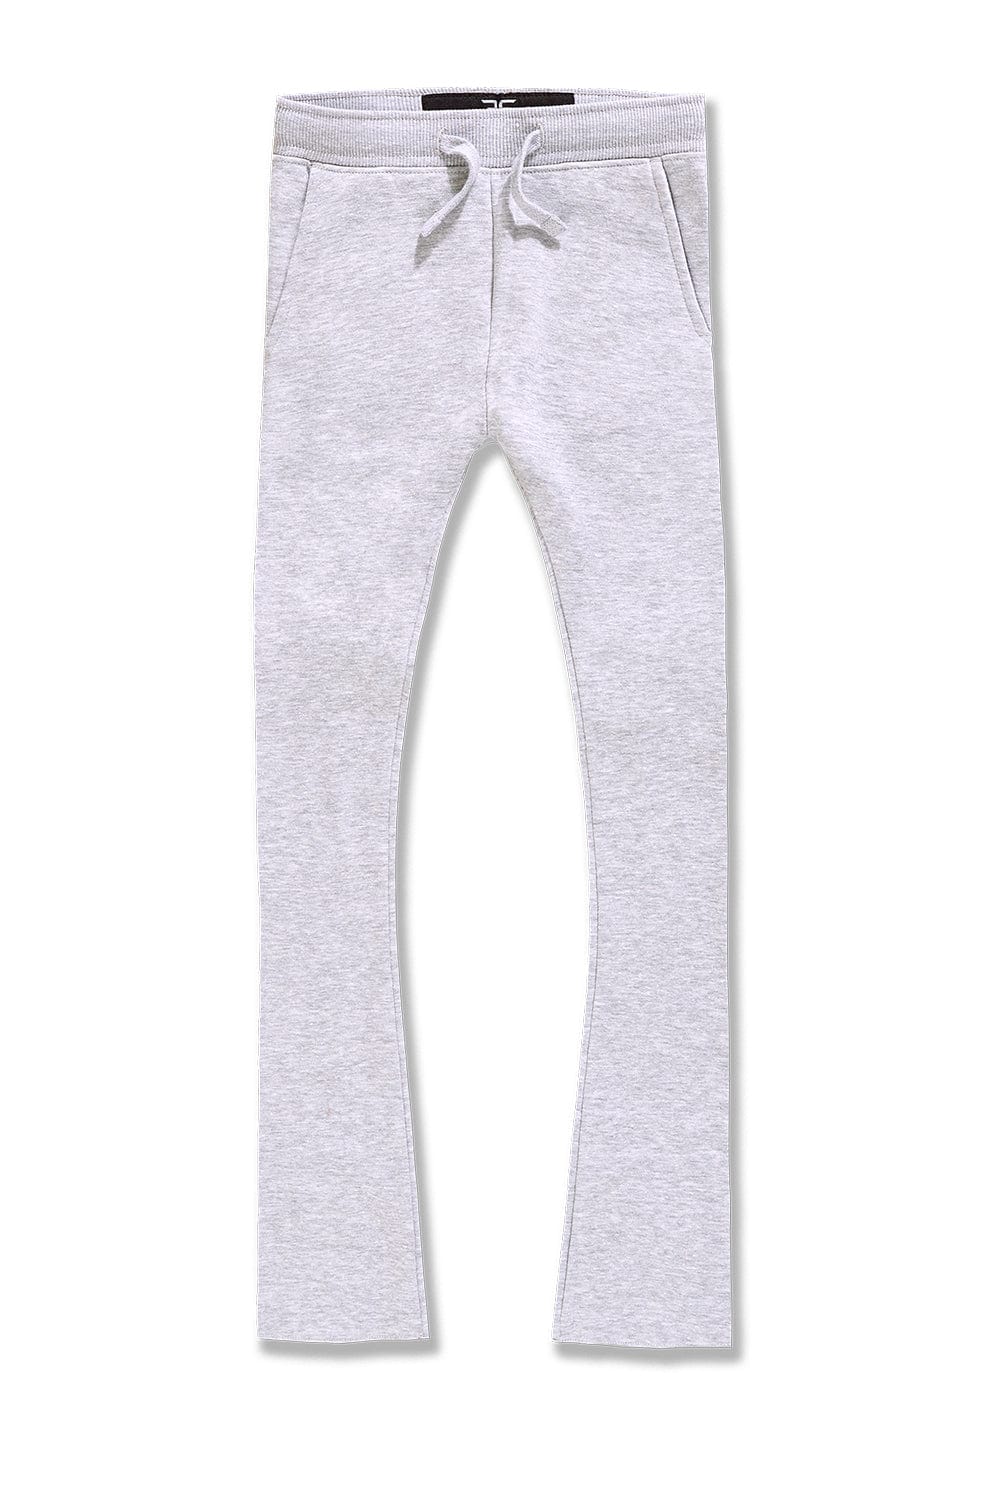 Kids Uptown Stacked Sweatpants - Heather Grey – Todays Man Store